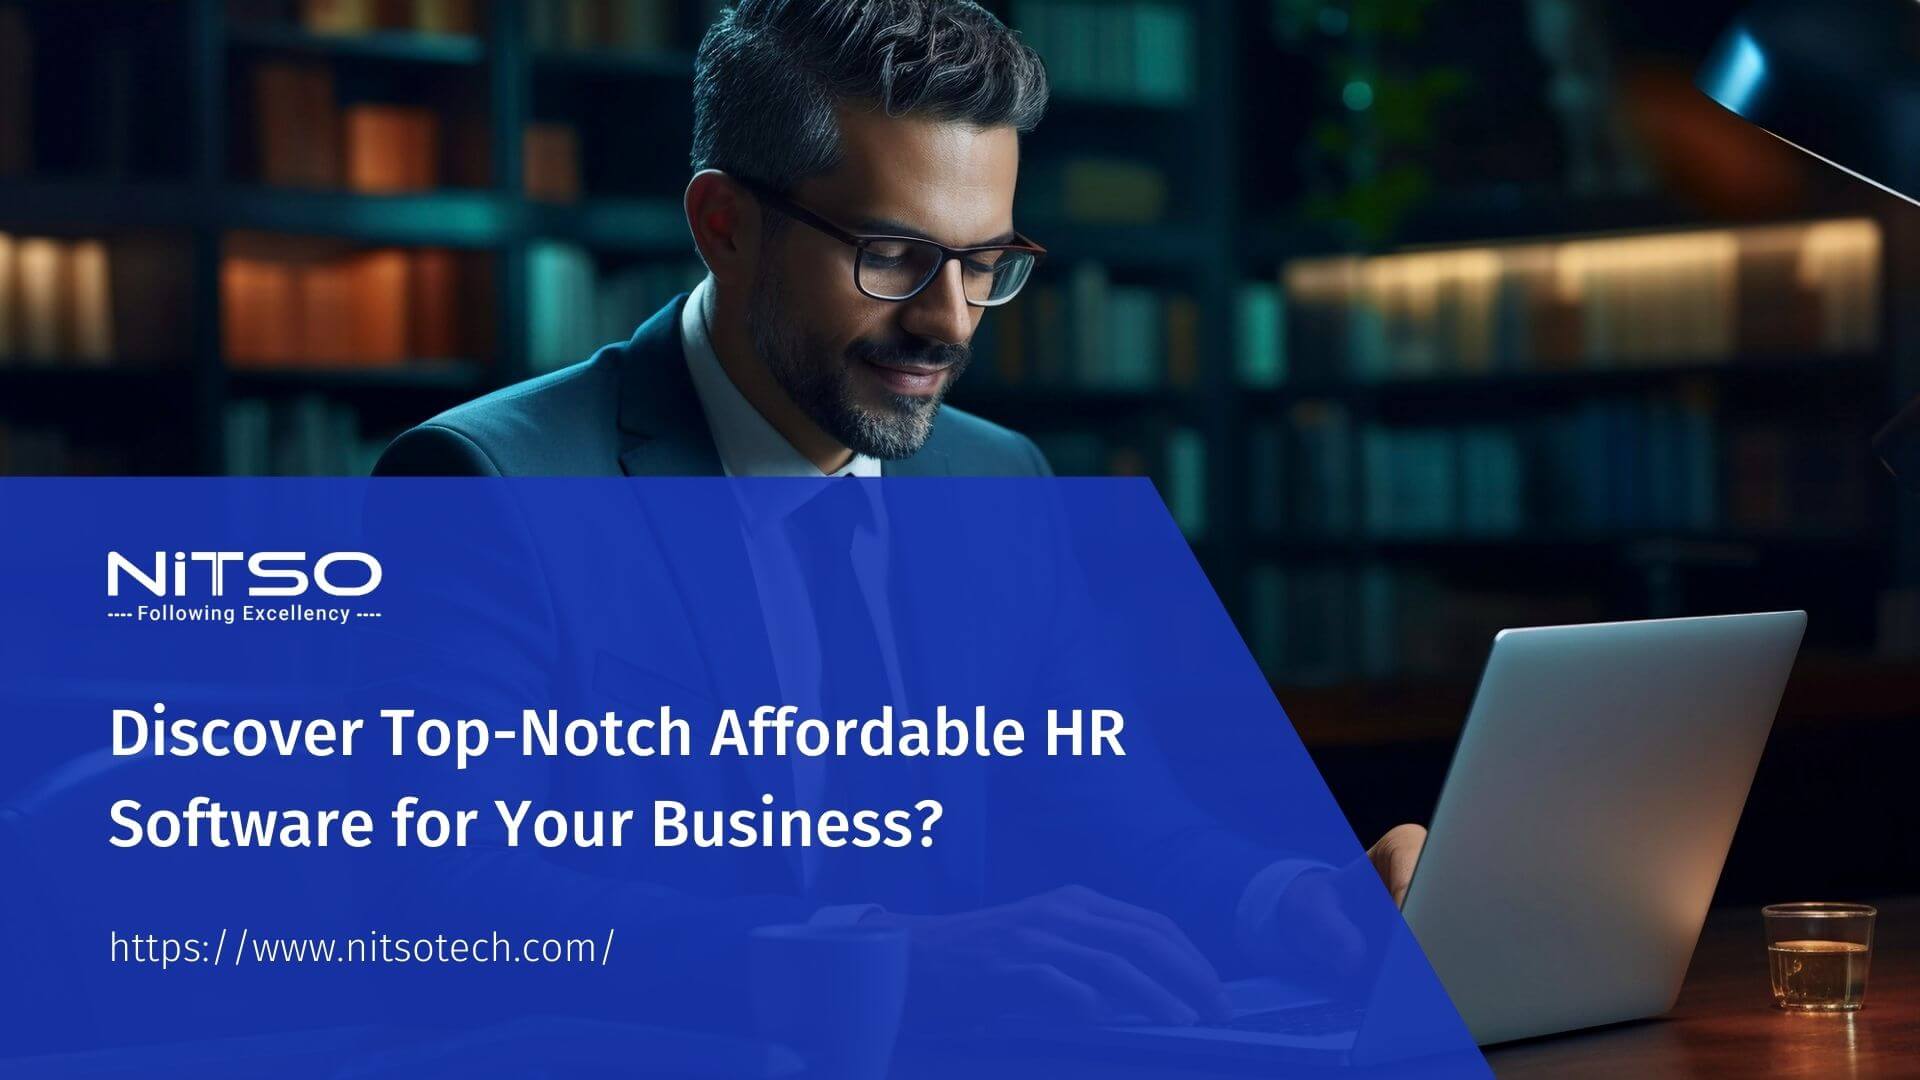 Discover Top-Notch Affordable HR Software for Your Business